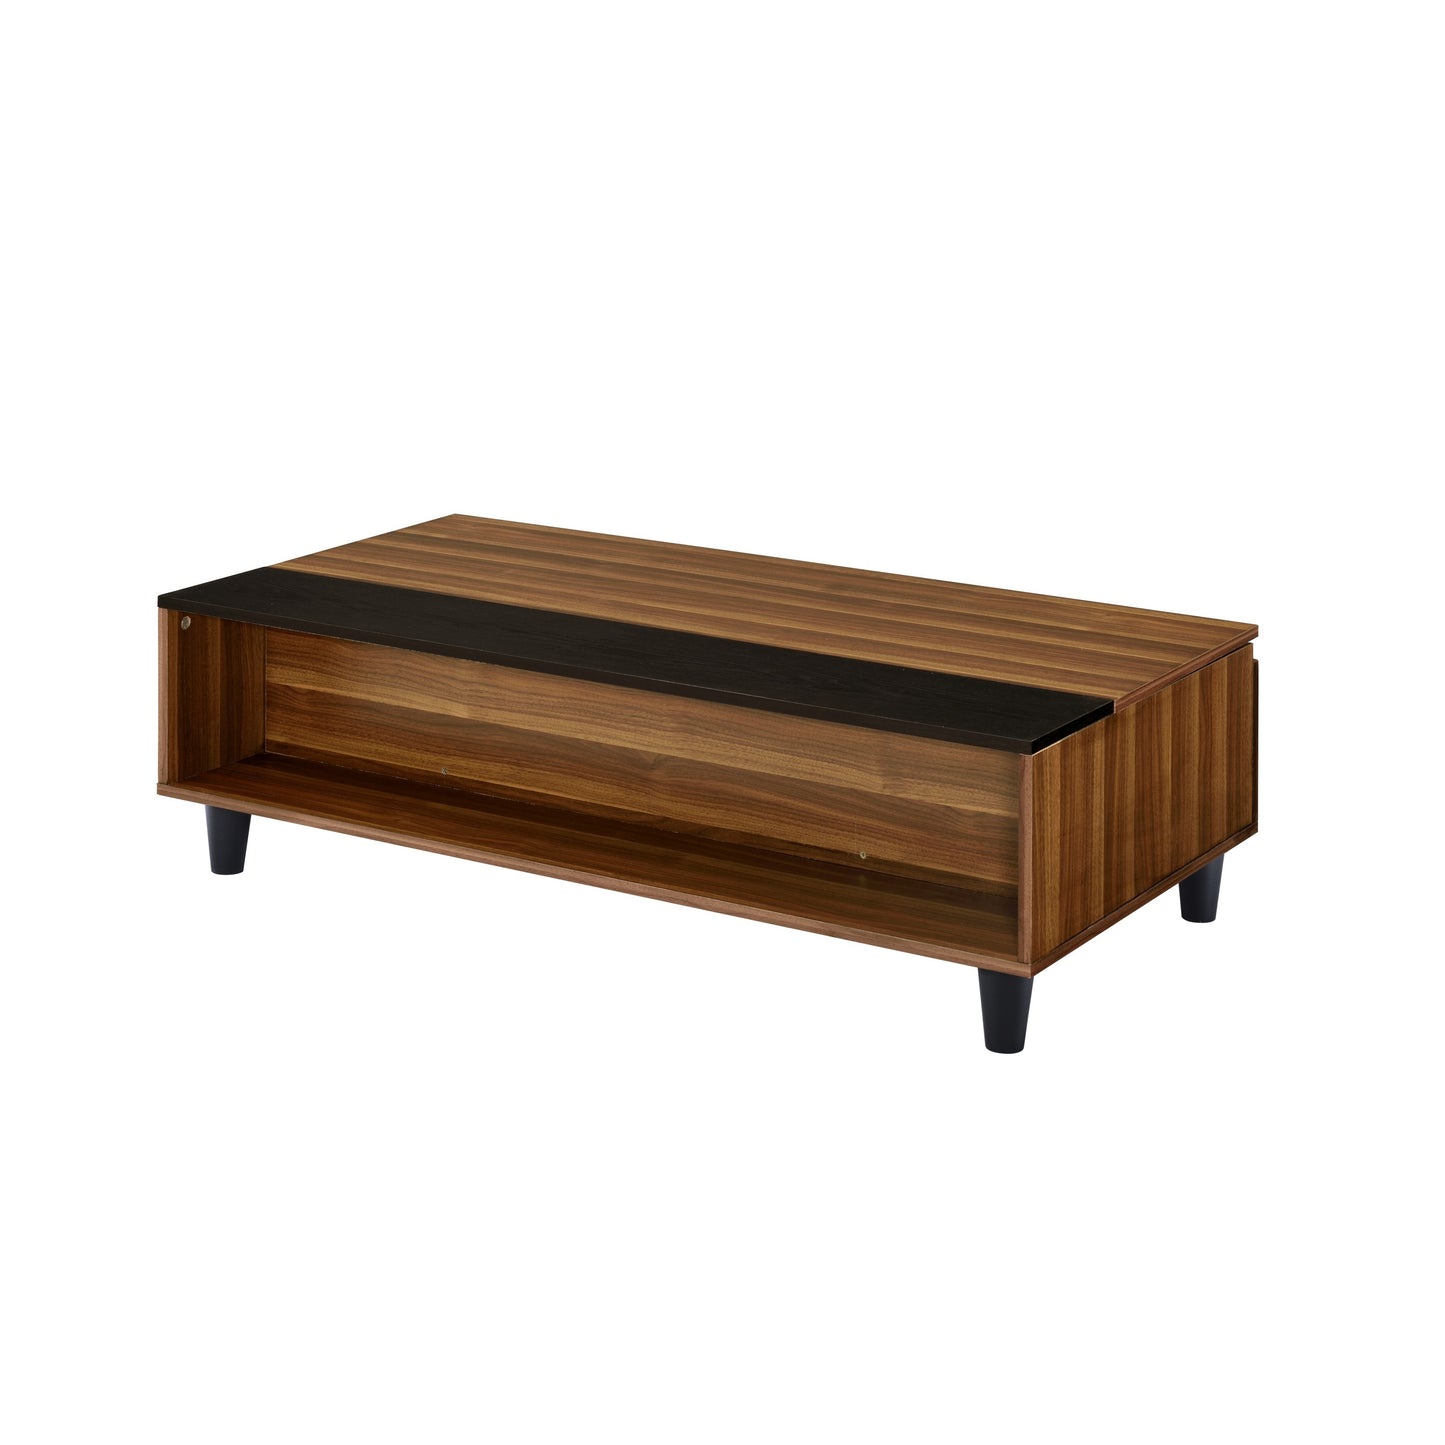 Walnut & Black Lift-Top Coffee Table with Storage Compartments